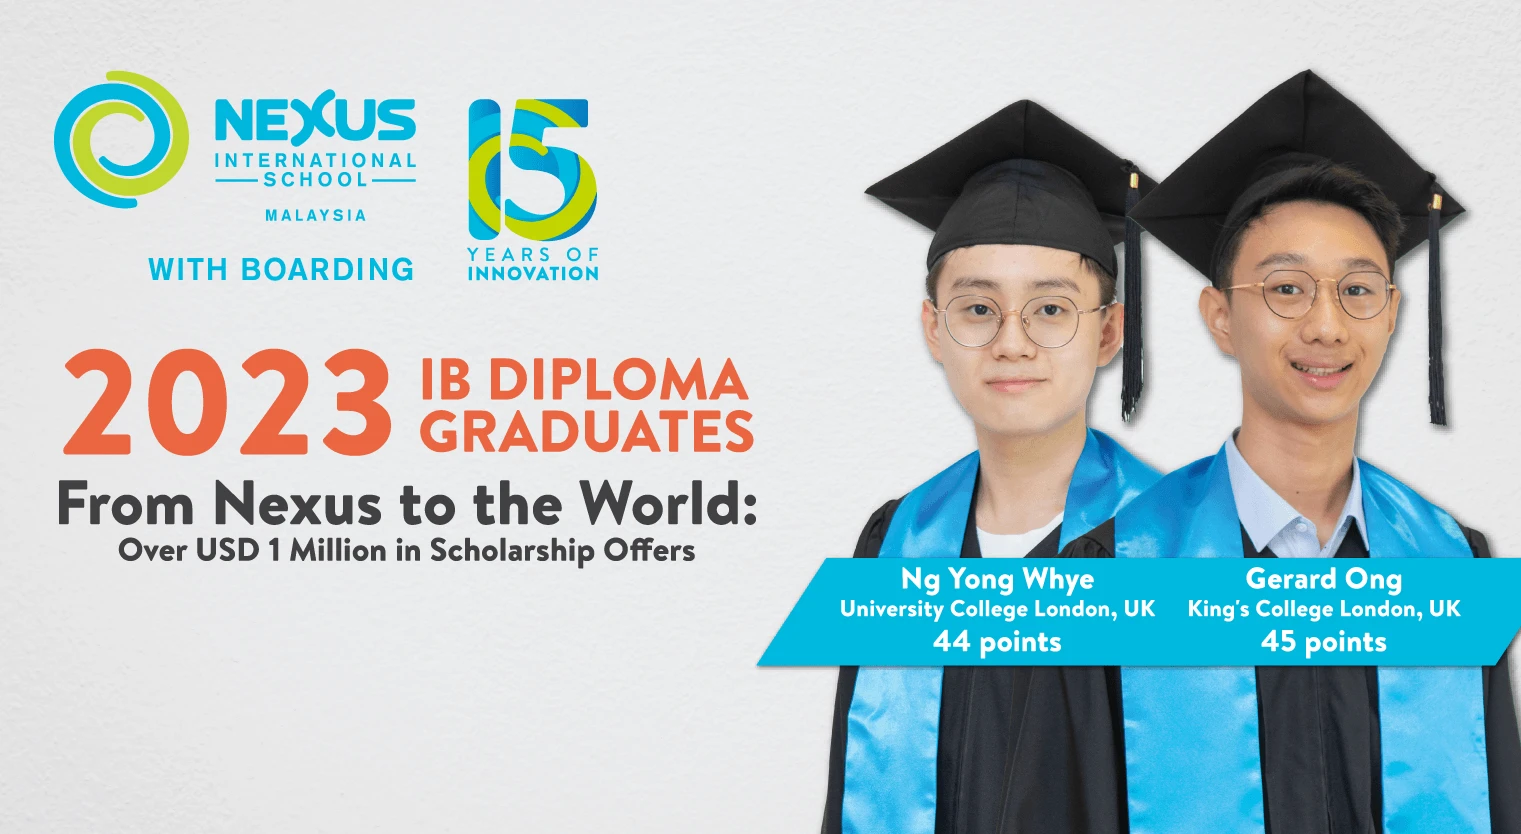 nexus-malaysian-student-top-in-the-world-for-ibdp-examinations-2023